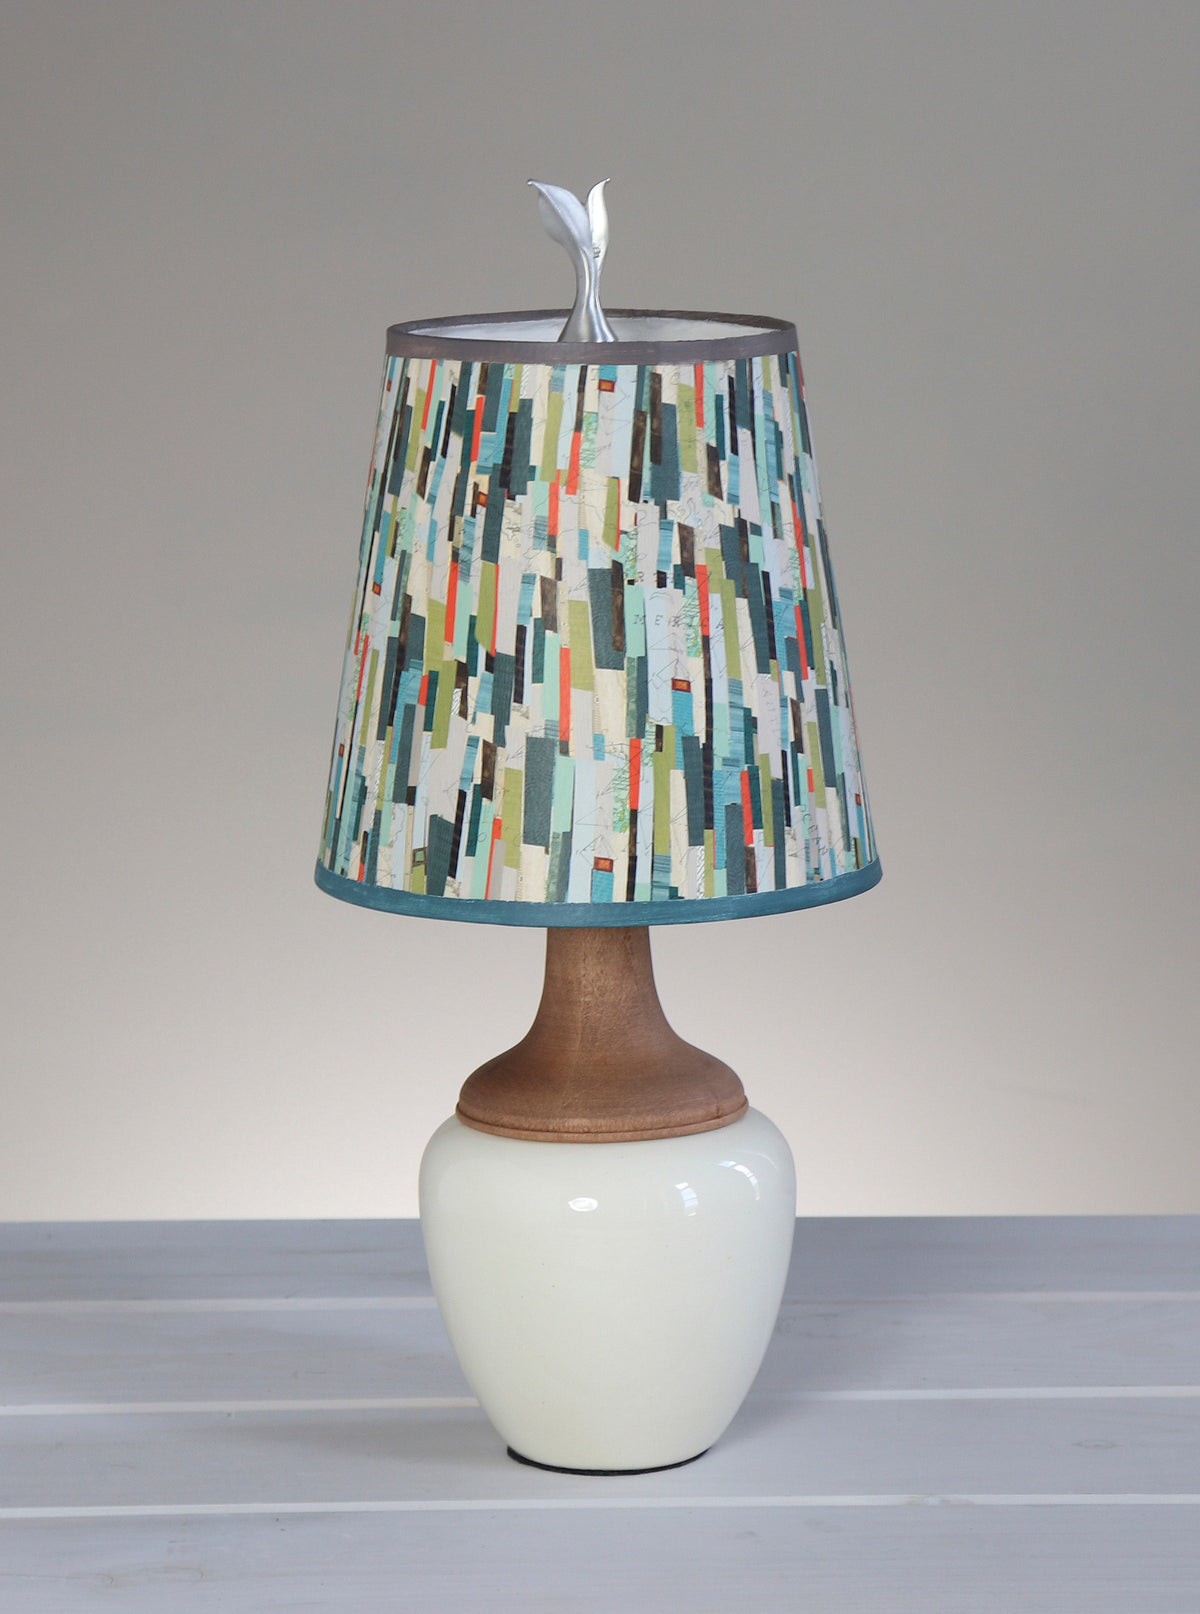 Ceramic and Maple Table Lamp in Ivory Gloss with Small Drum Shade in Papers